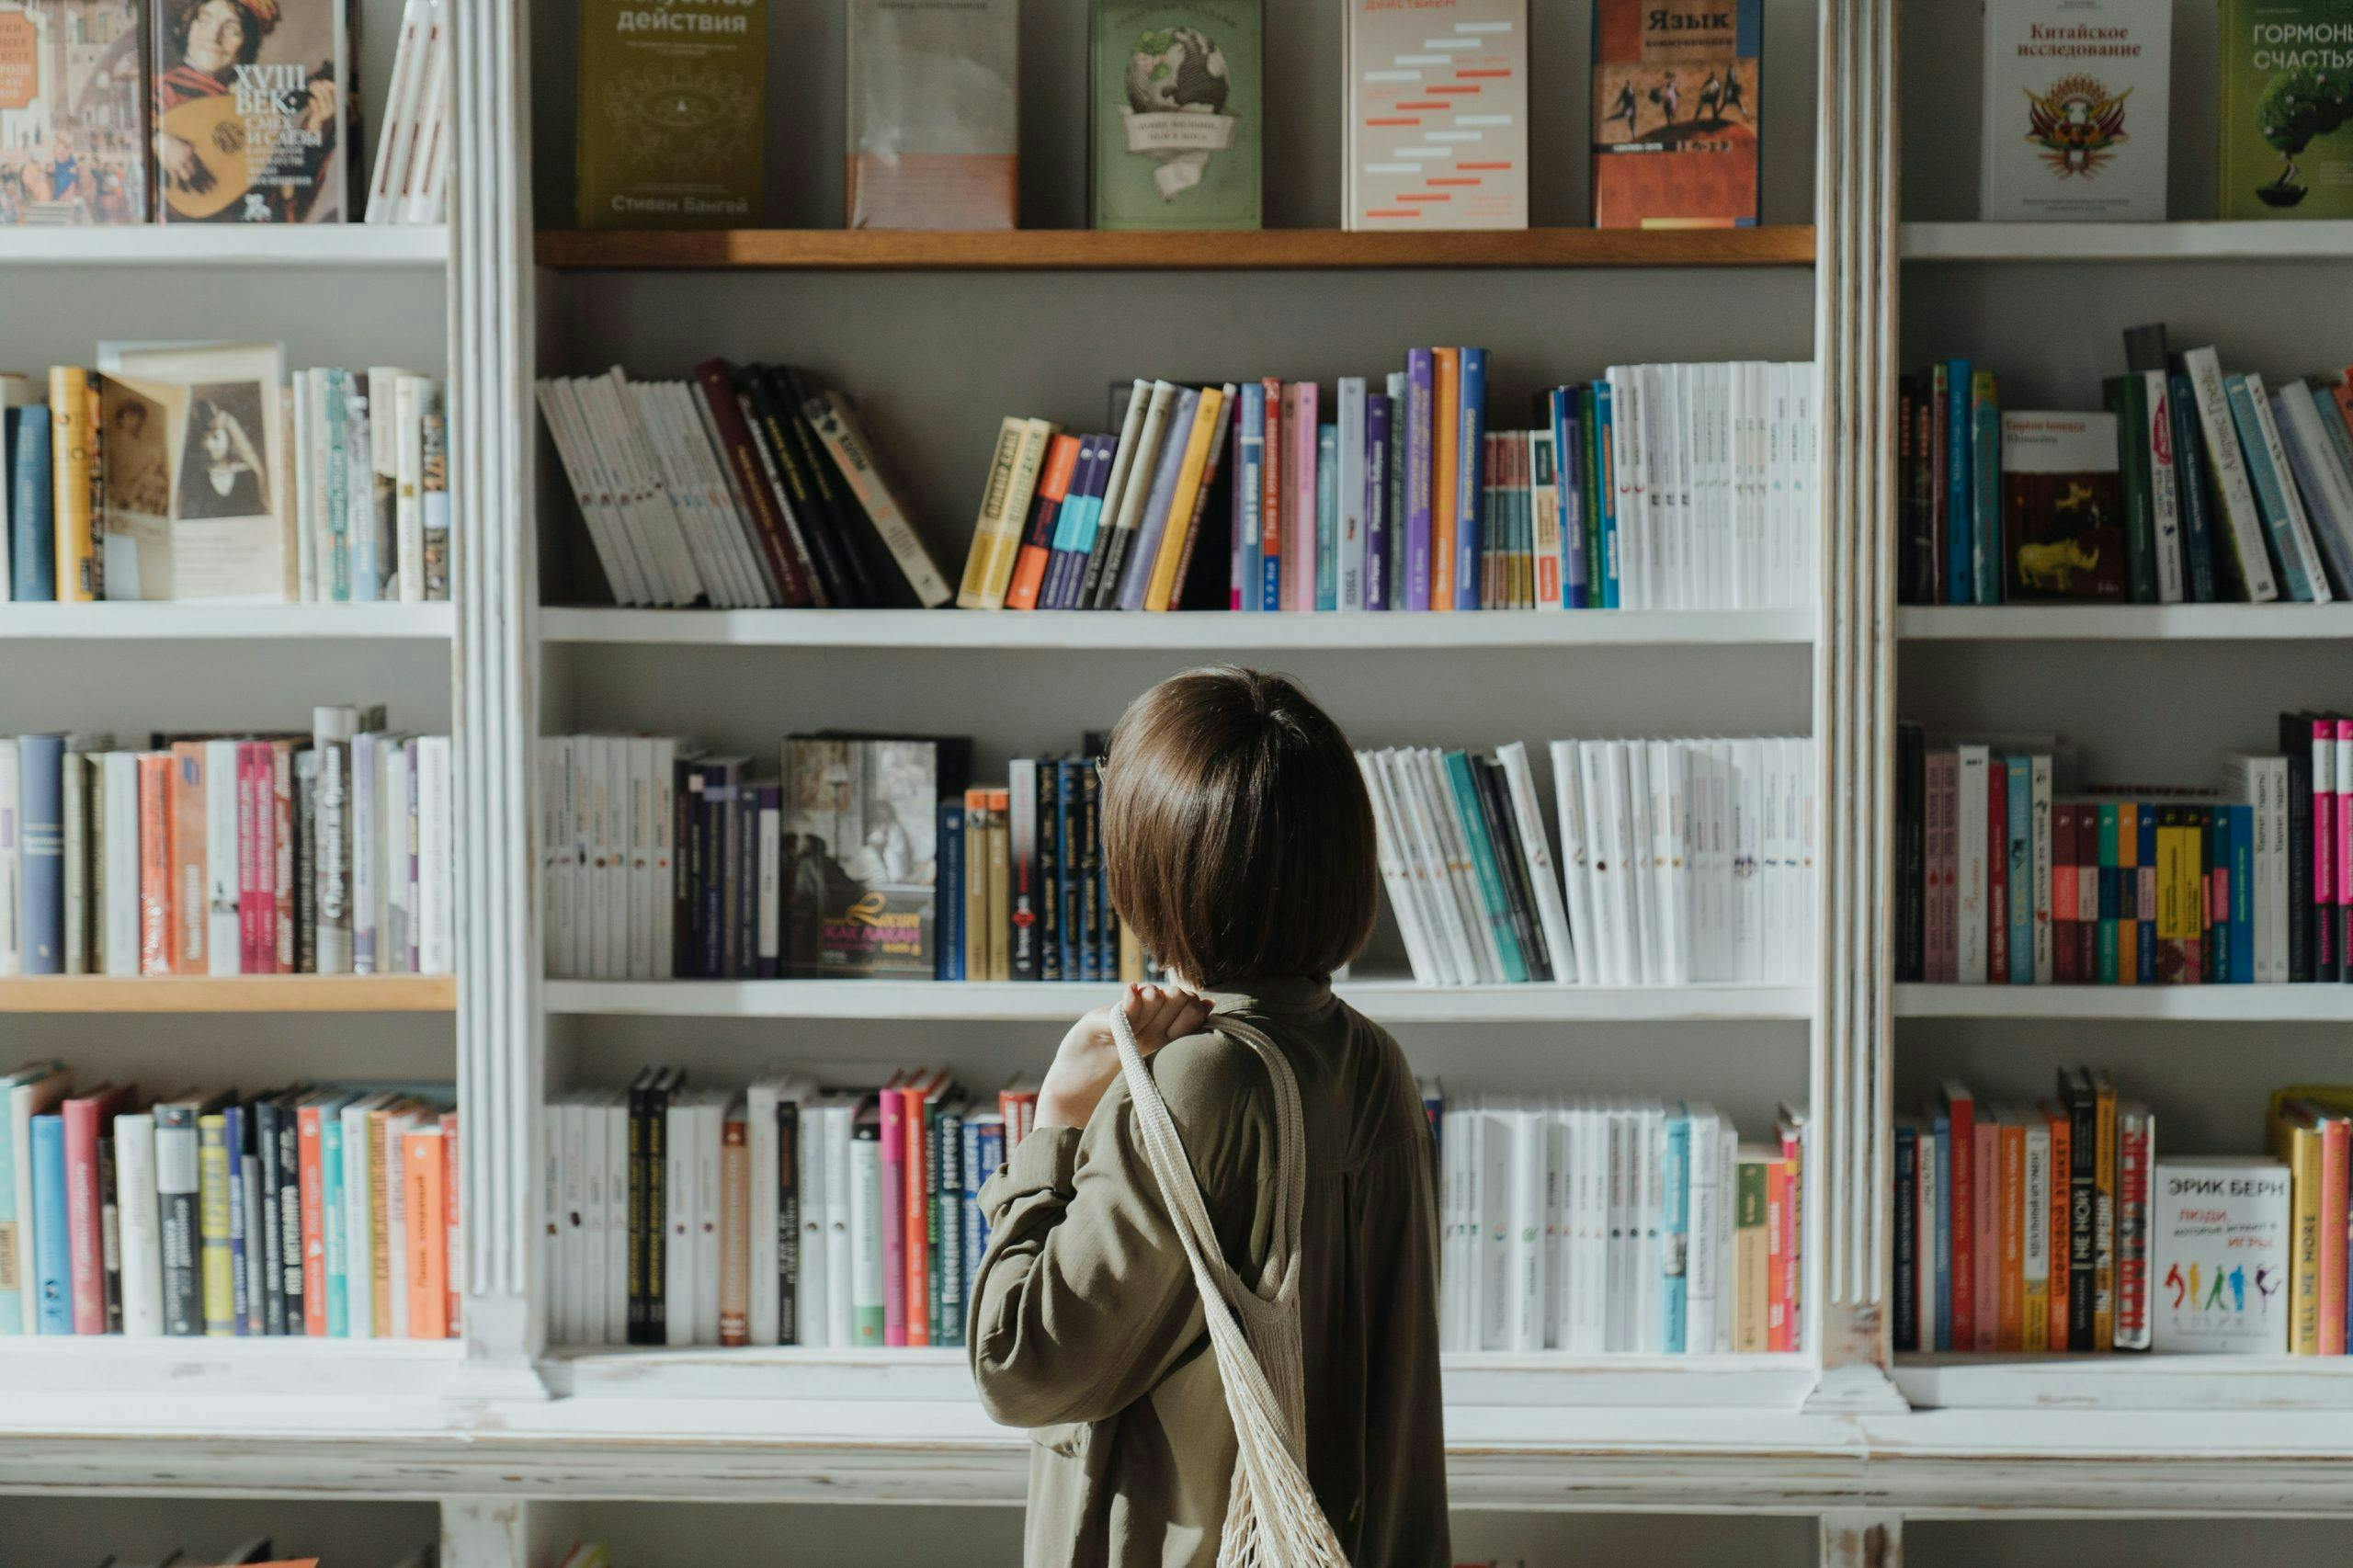 Person standing, browsing a large white bookshelf filled with various books, in a library or bookstore setting. They carry a beige tote bag and wear a green jacket.